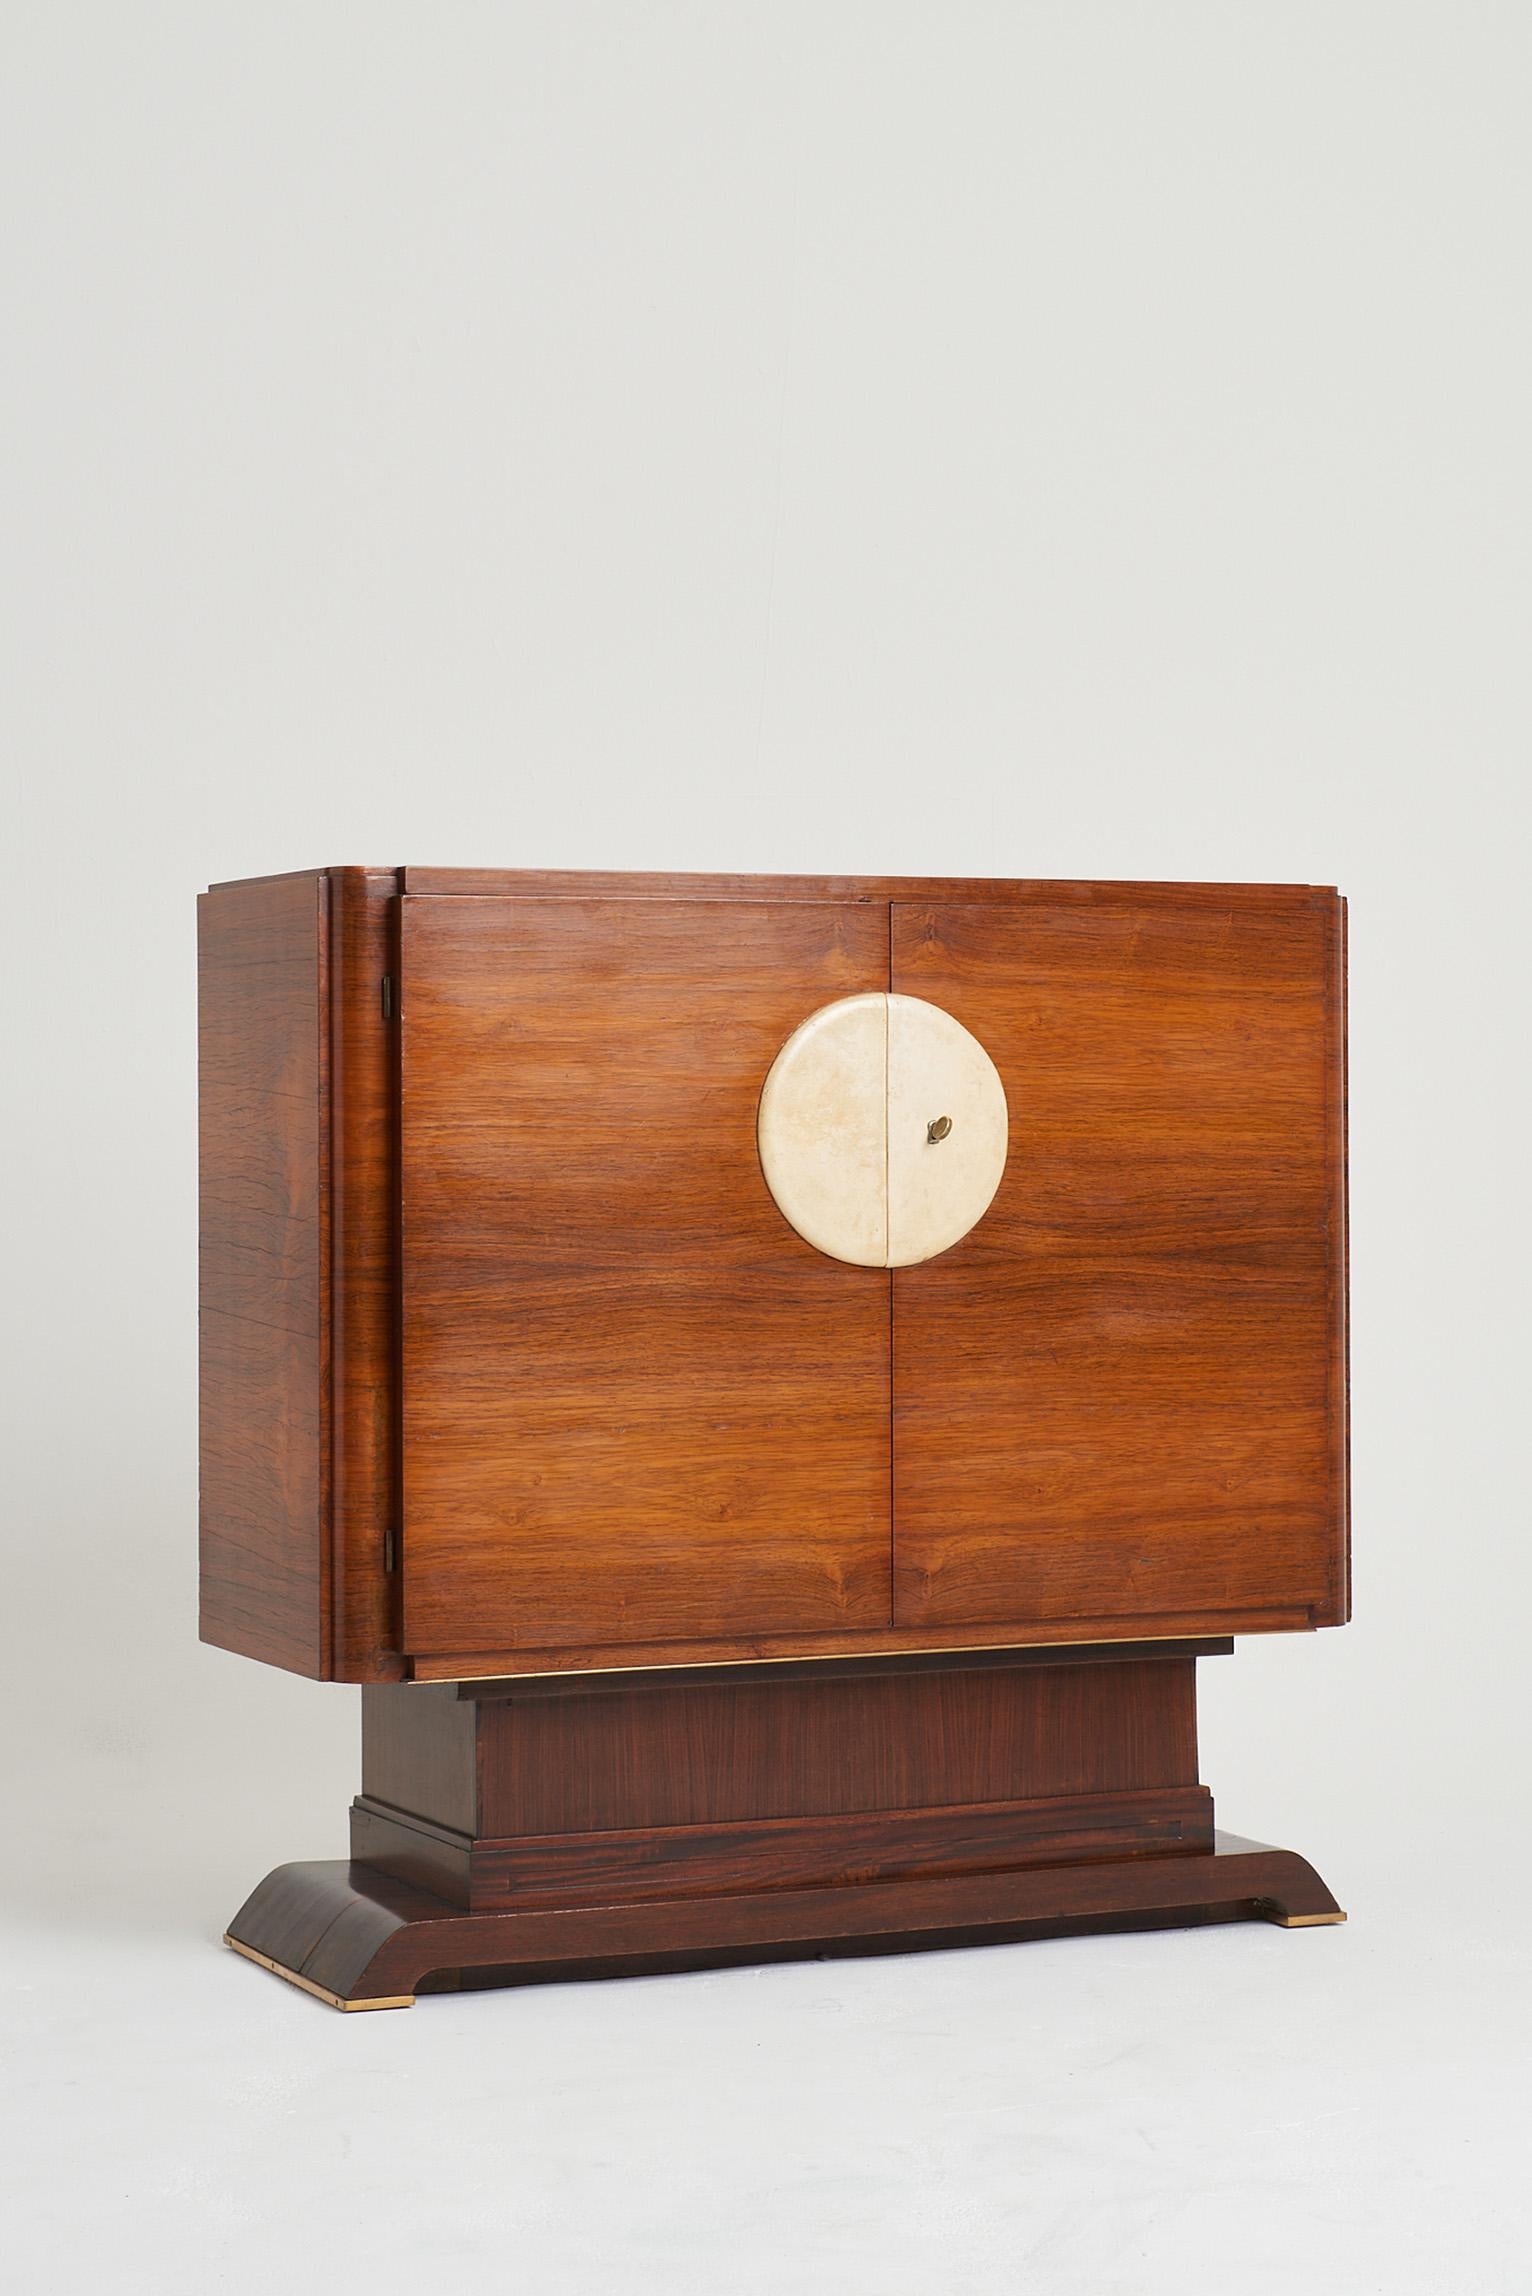 An Art Deco walnut veneered cabinet, of unsual shape, the two doors adorned with a large velum disk and brass key, opening to reveal a central adjustable shelf and two mahogany veneered drawers.
France, Circa 1930.